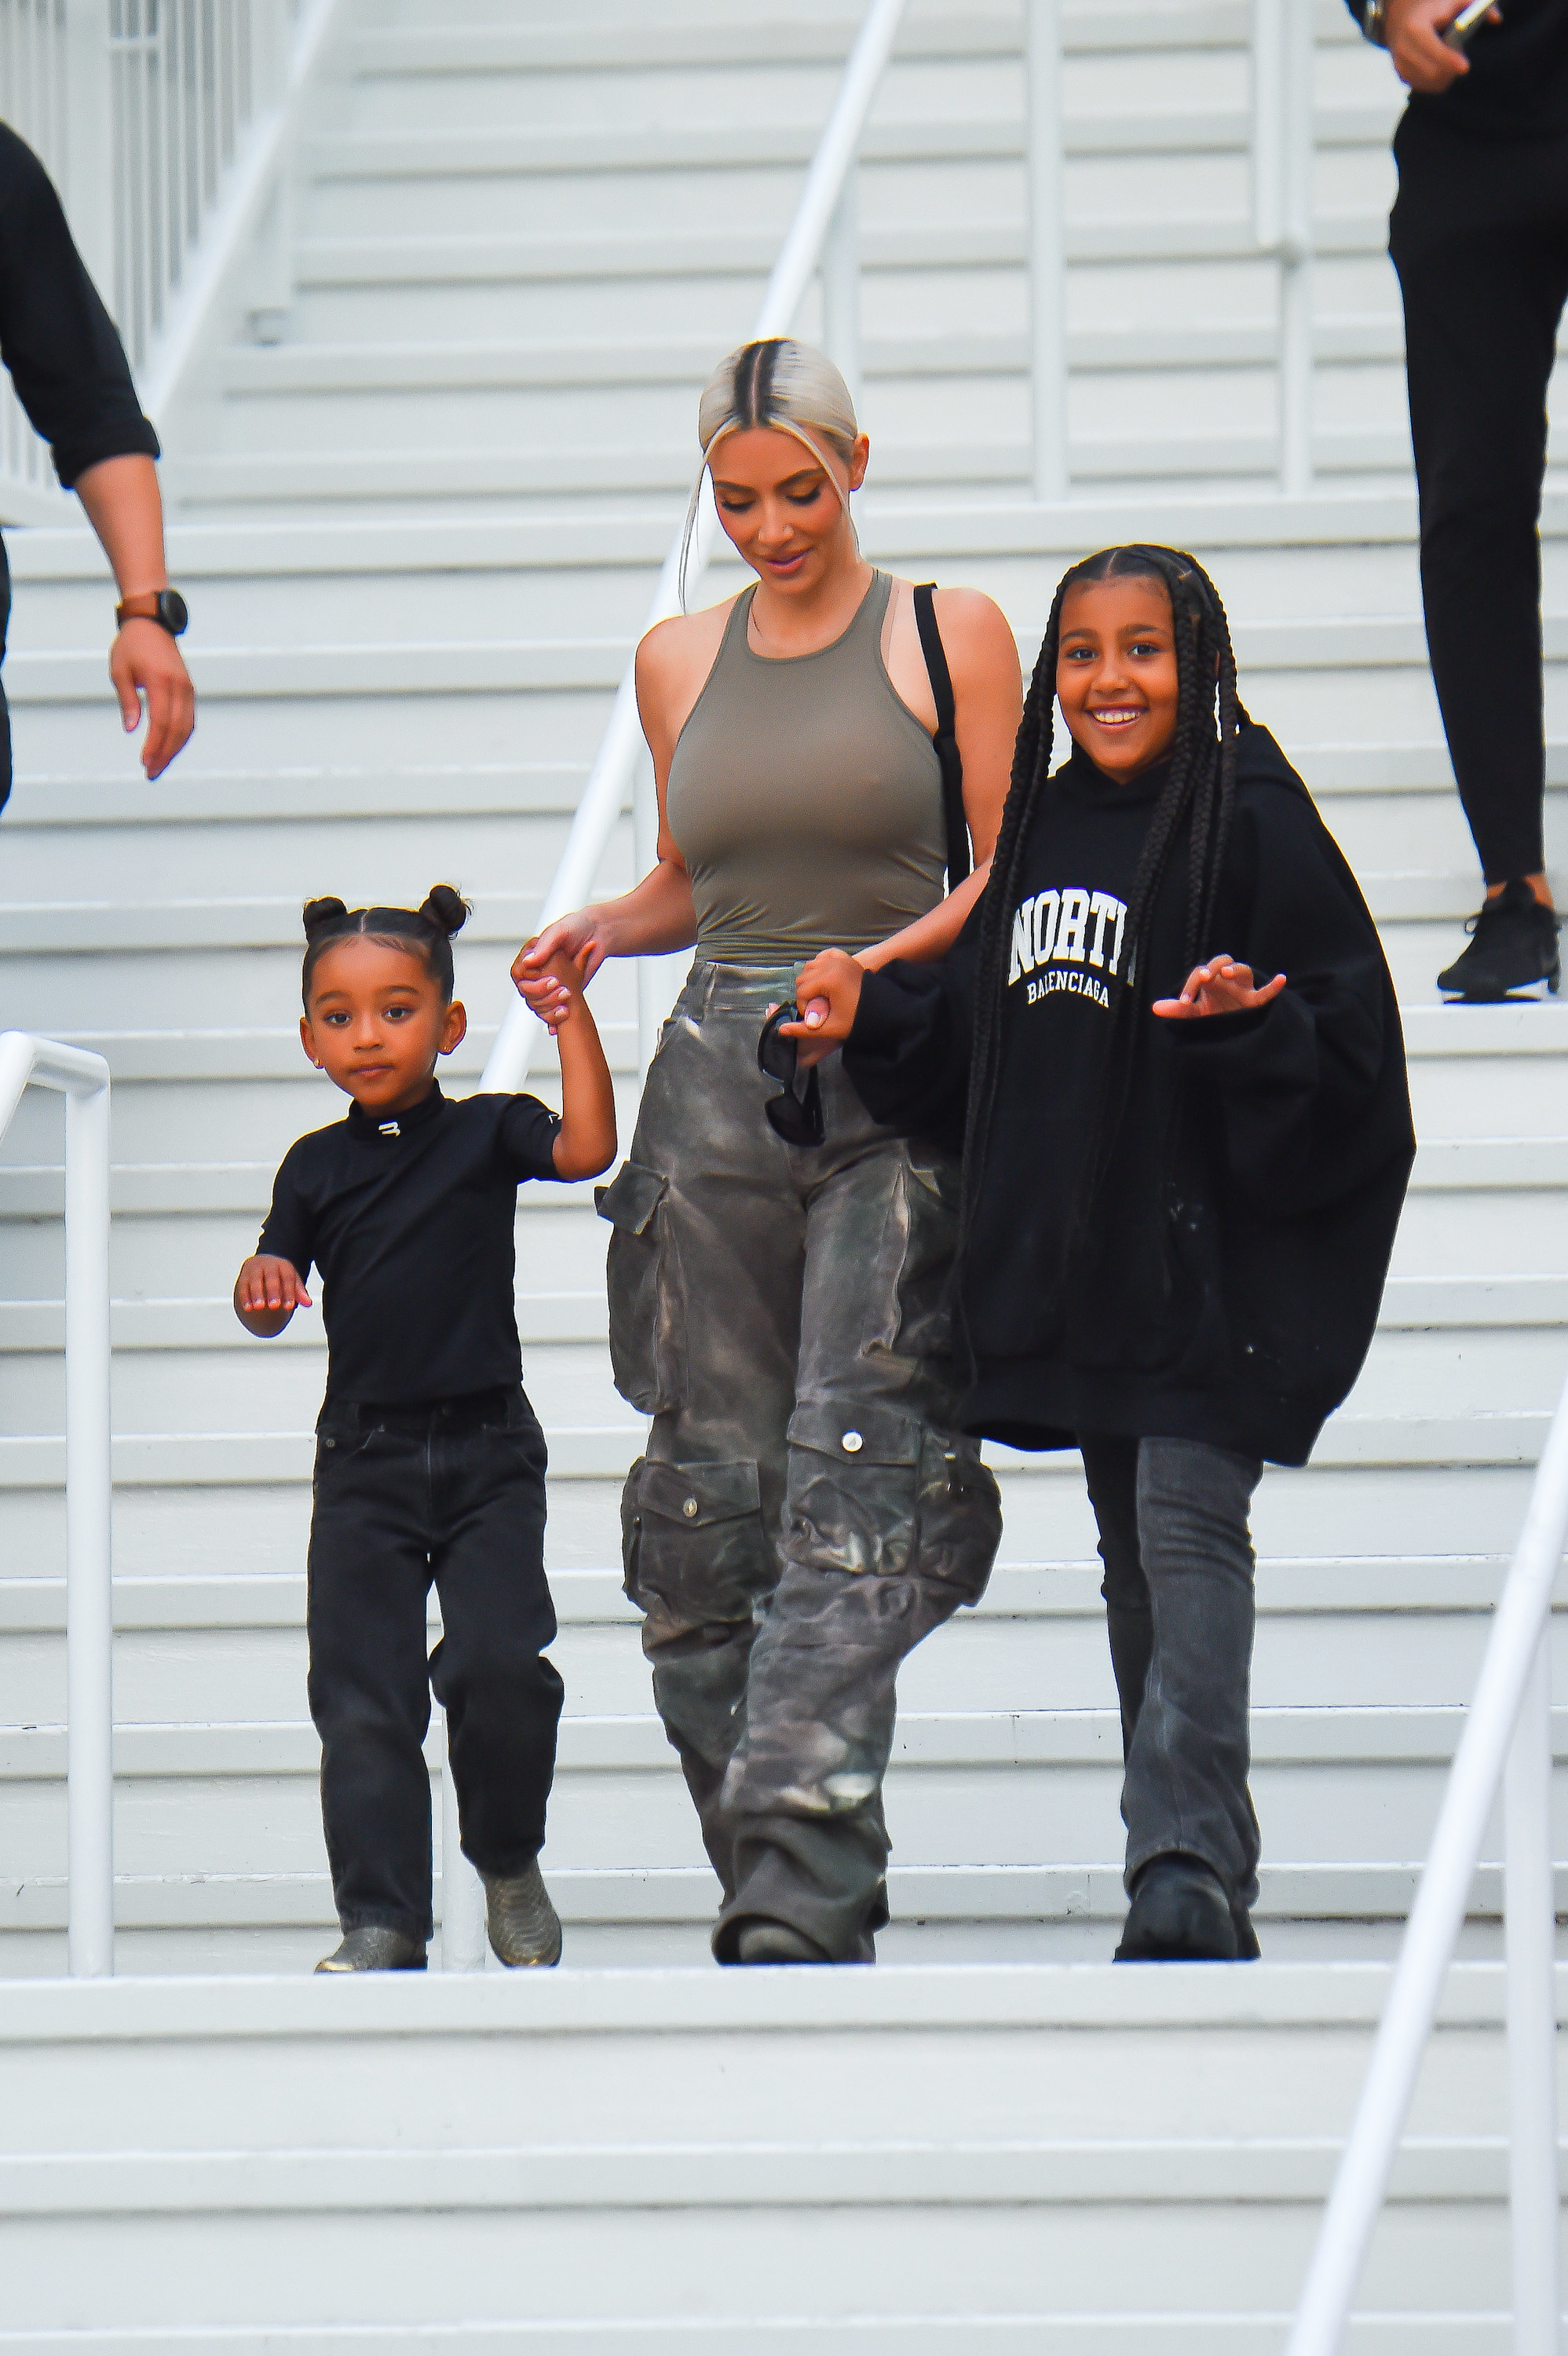 Kim holding the hands of two of her children on stairs